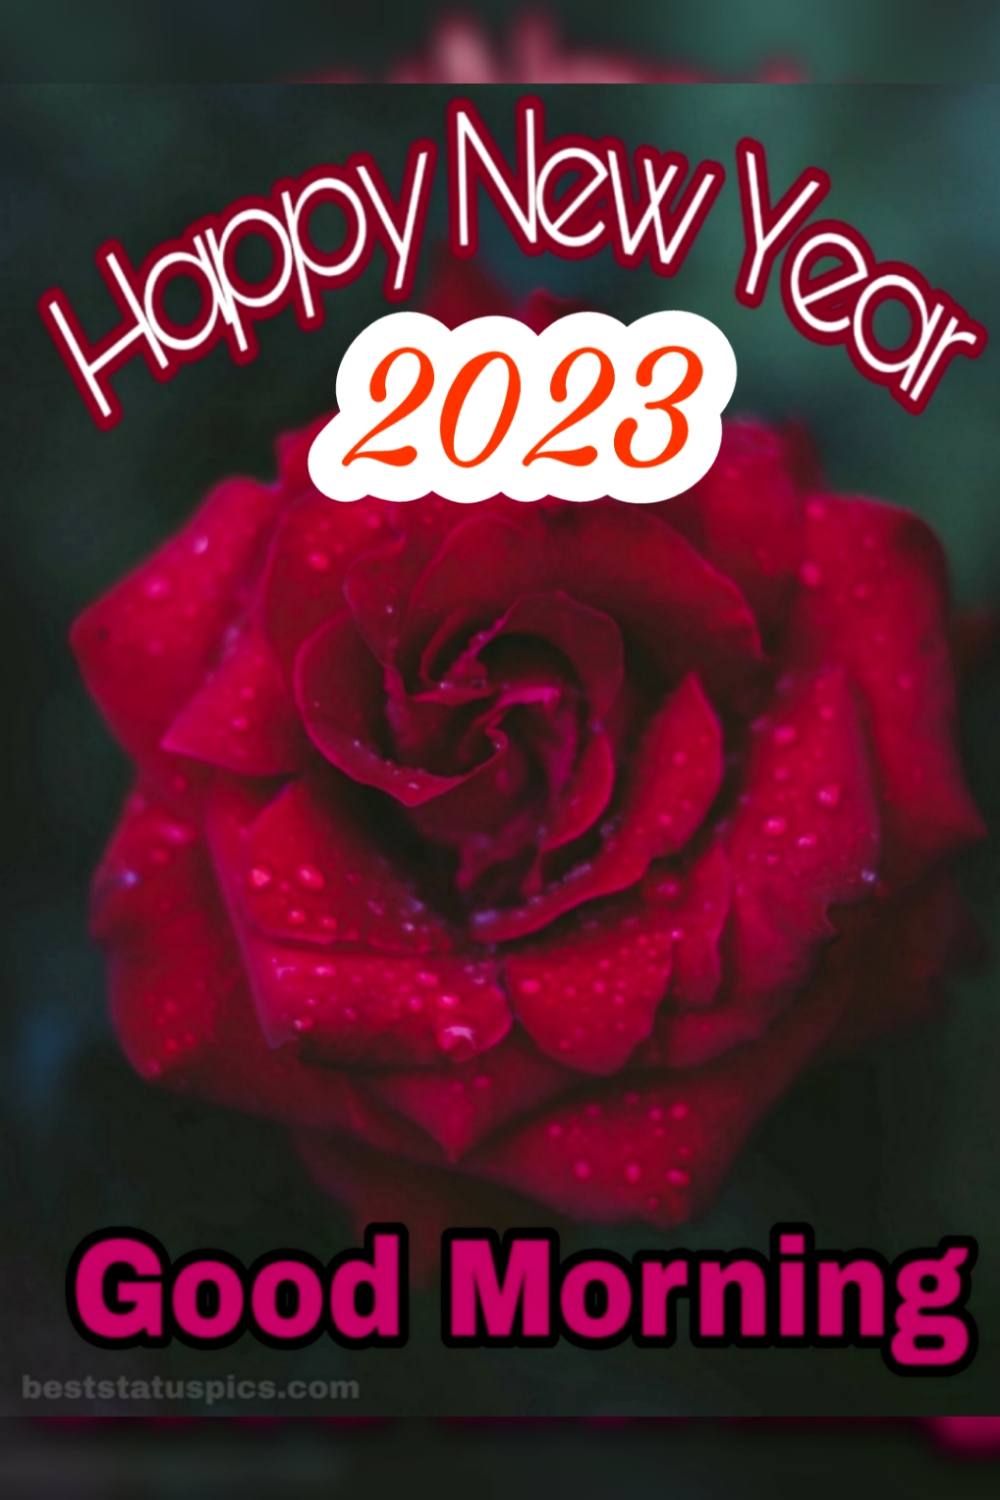 Cute Happy New Year 2023 Good Morning pic with red rose